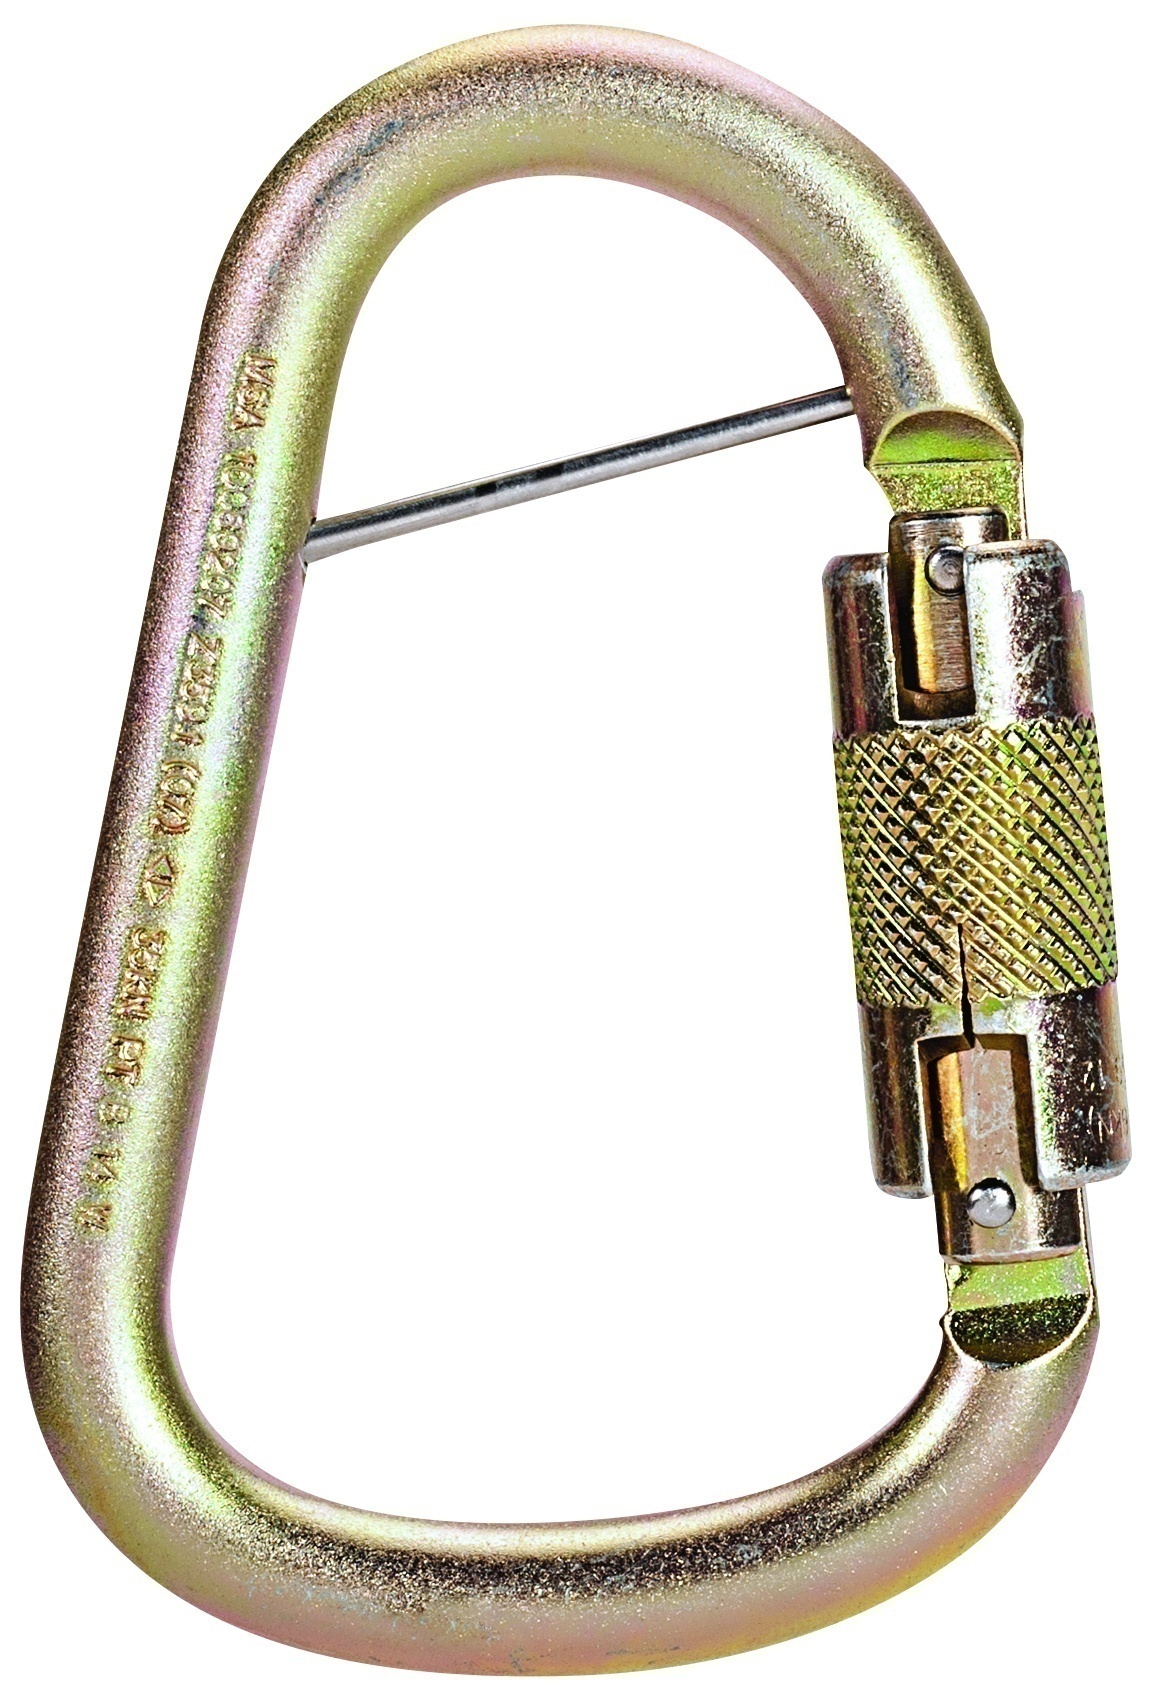 MSA Auto-Locking 1 Inch Steel Carabiner from GME Supply